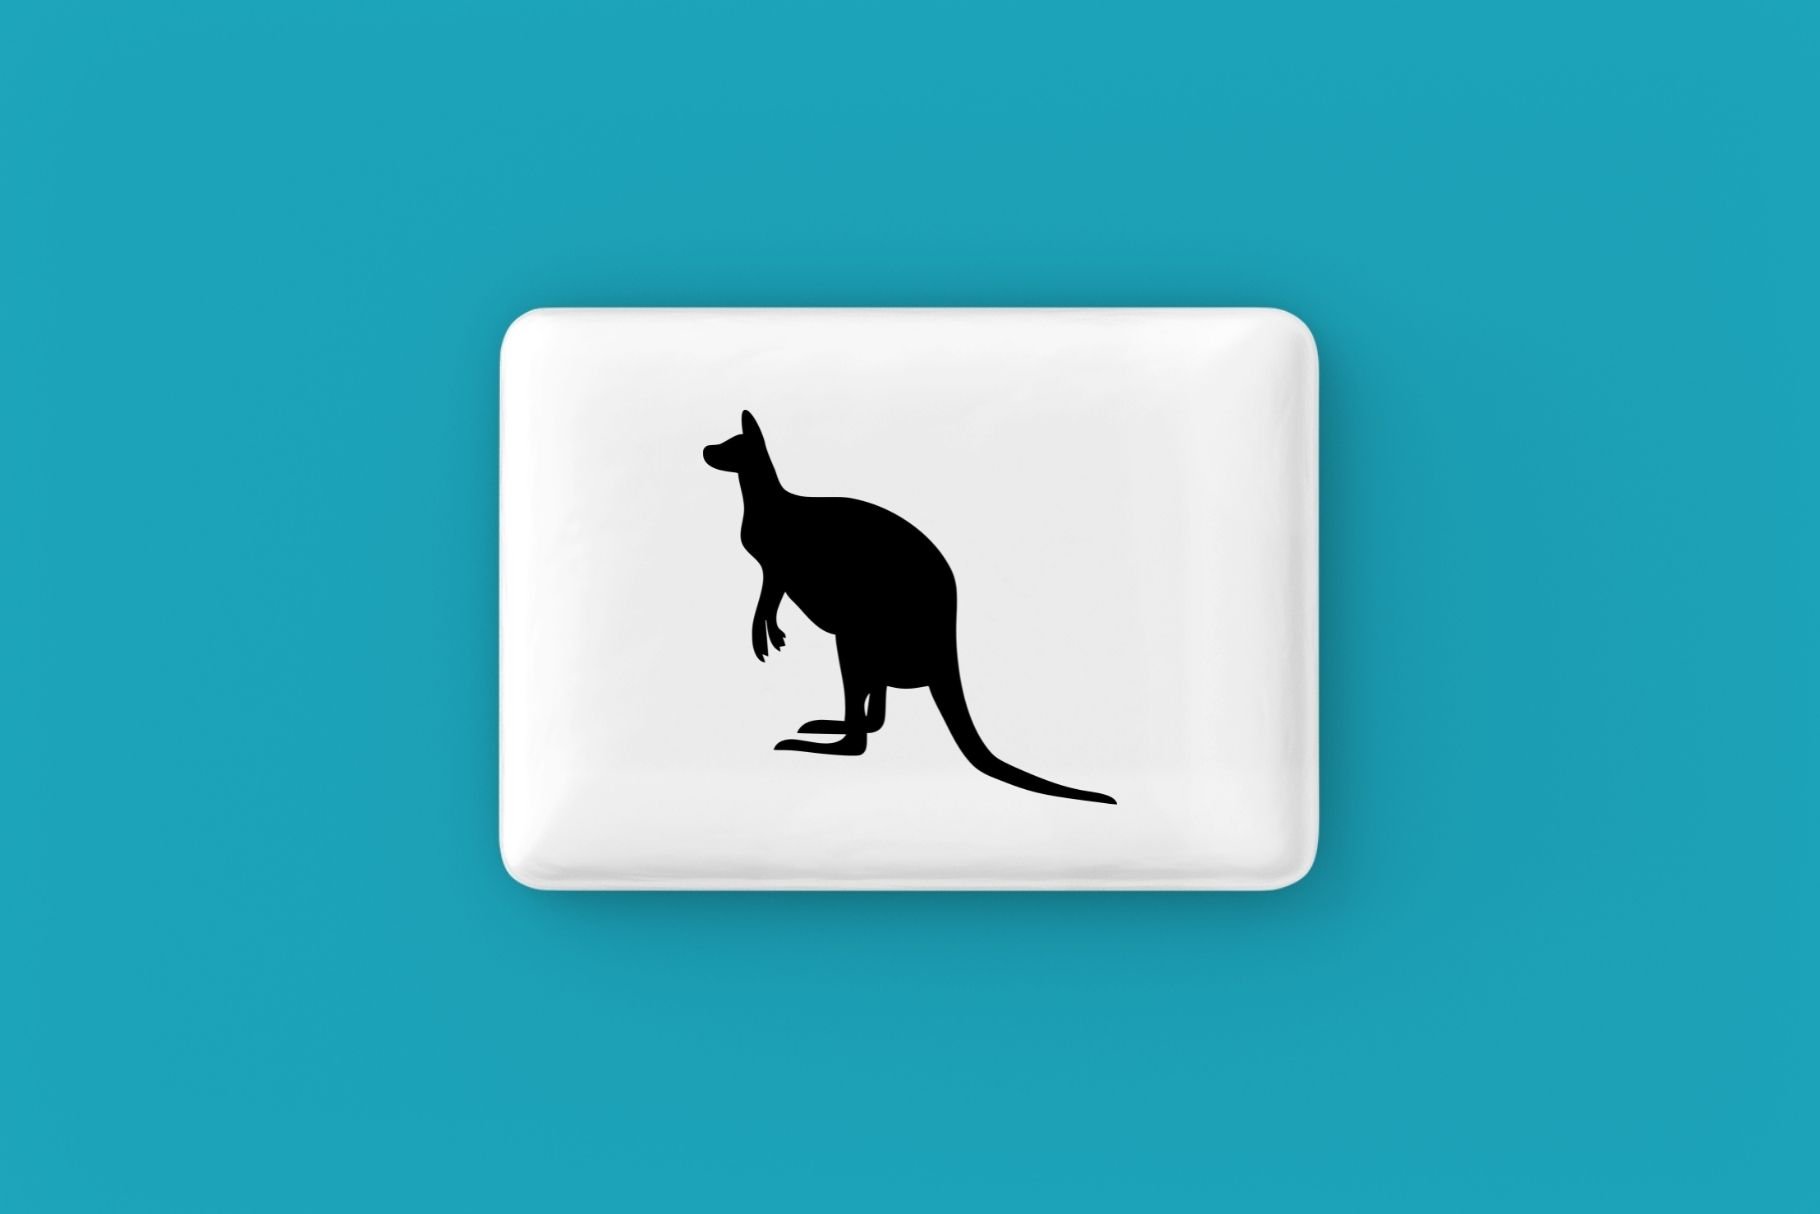 Turquoise background with the white button and kangaroo.